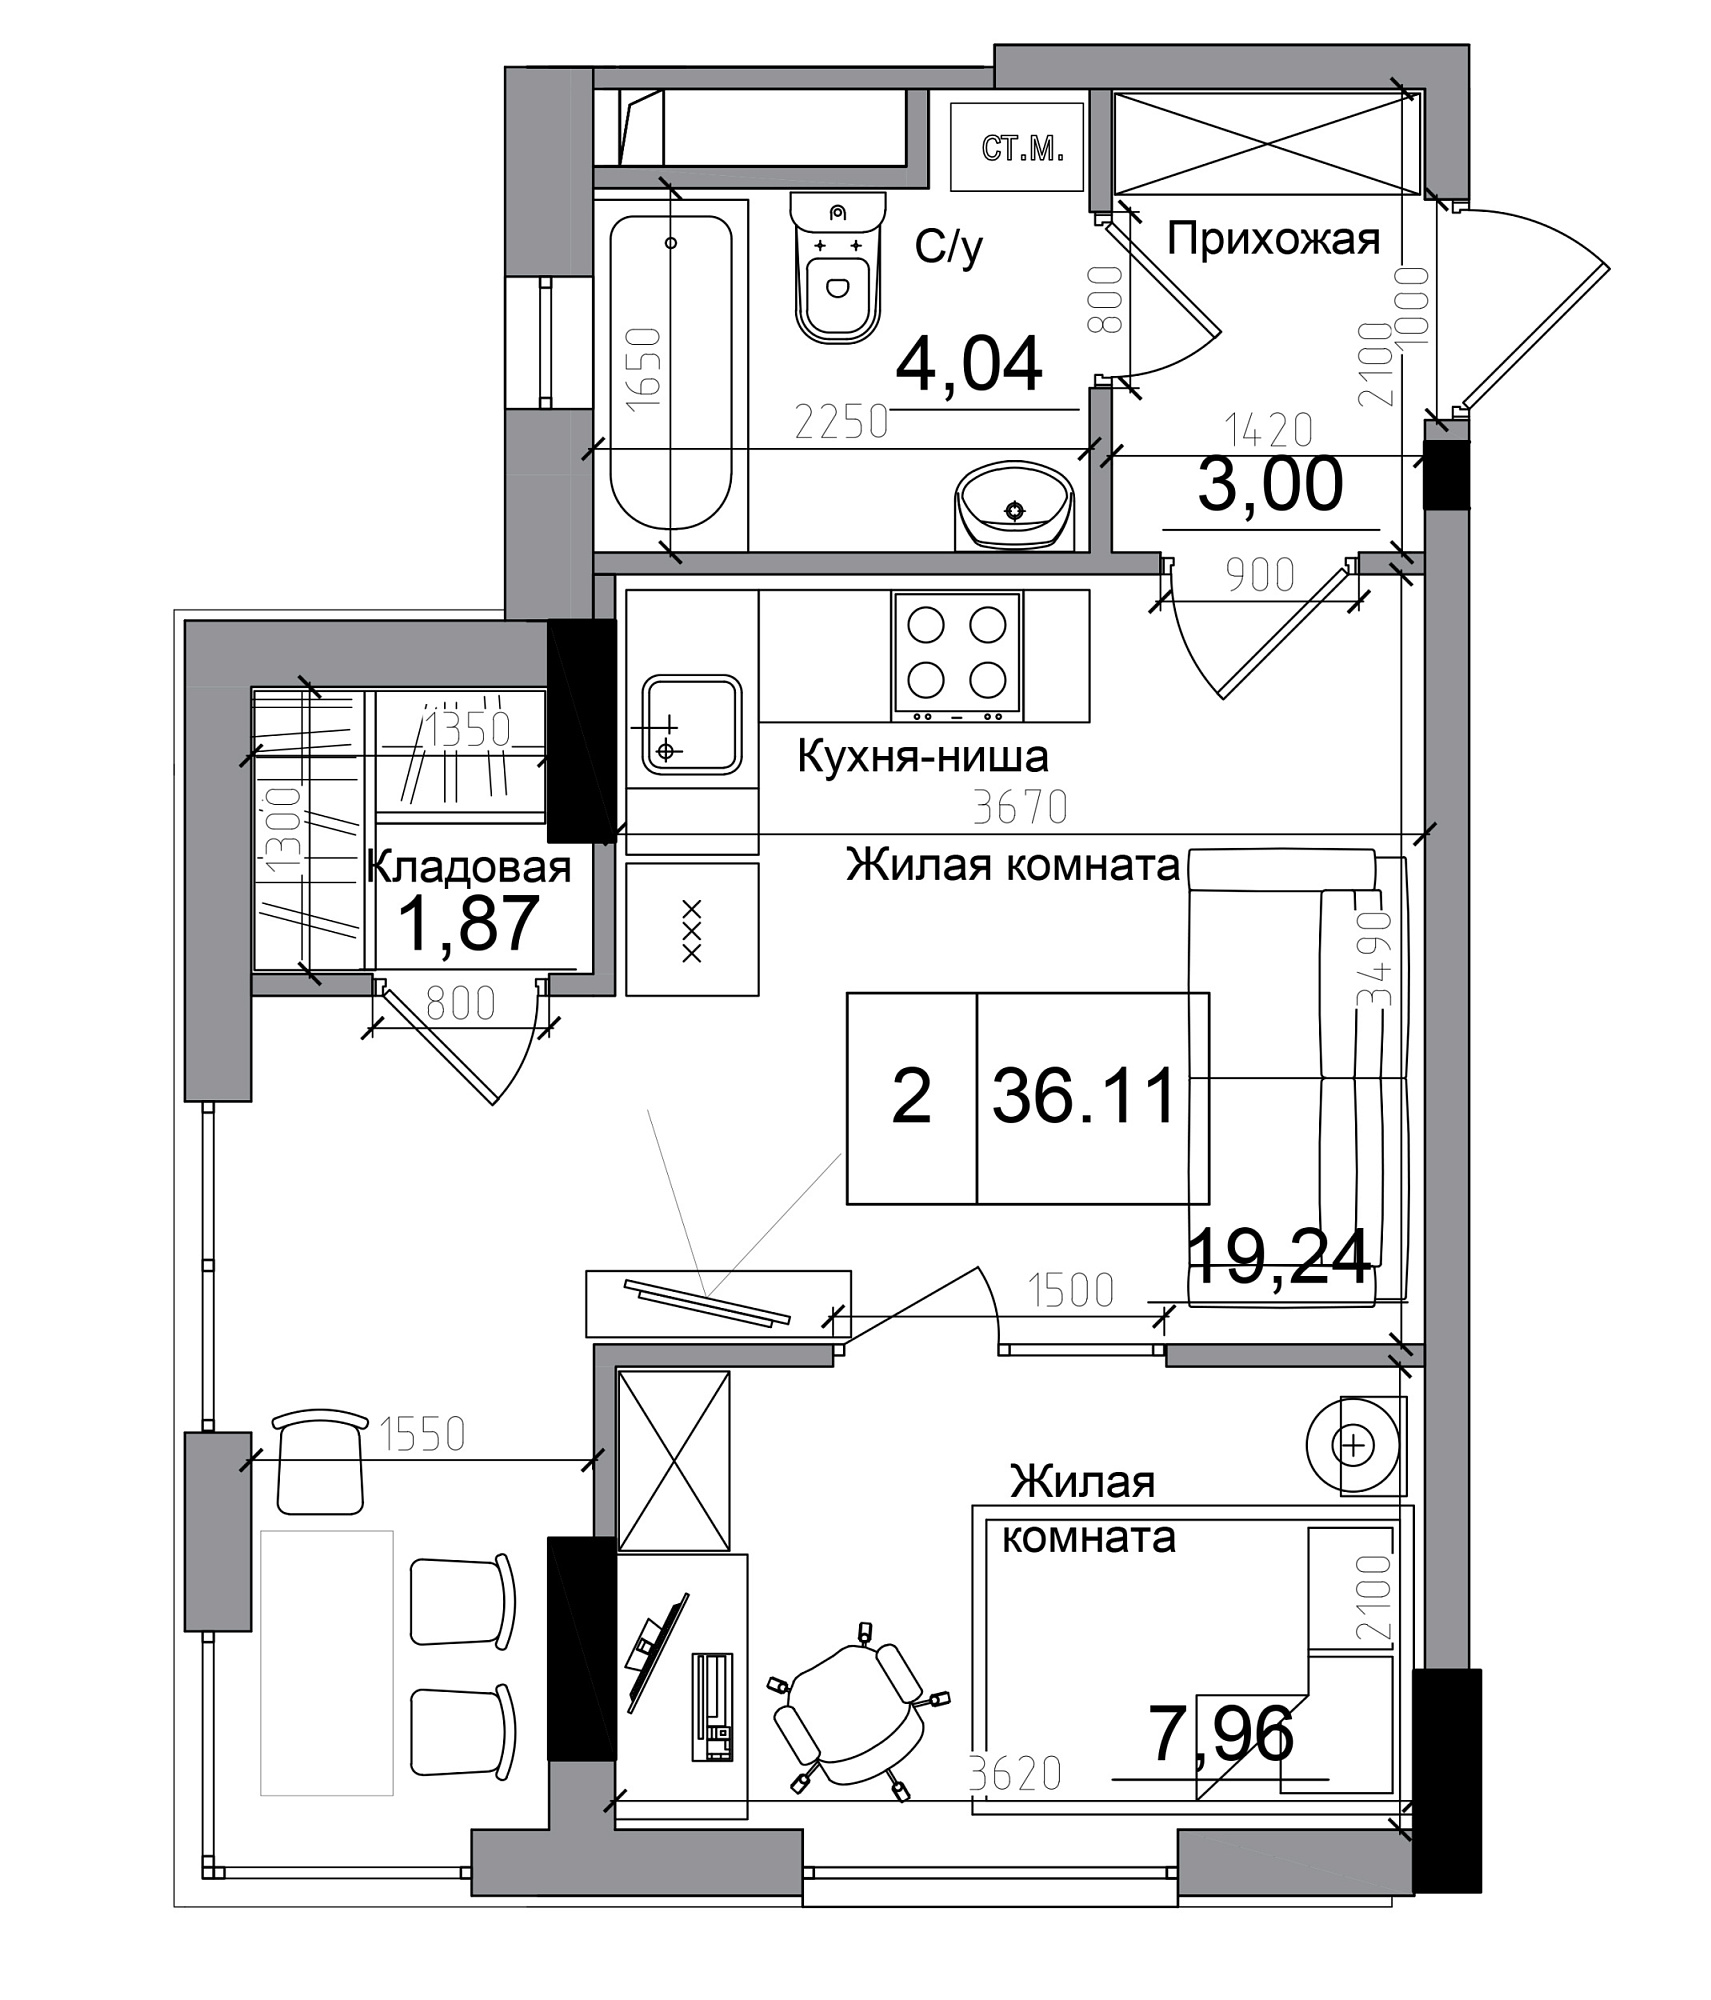 Planning 1-rm flats area 36.11m2, AB-11-12/00004.